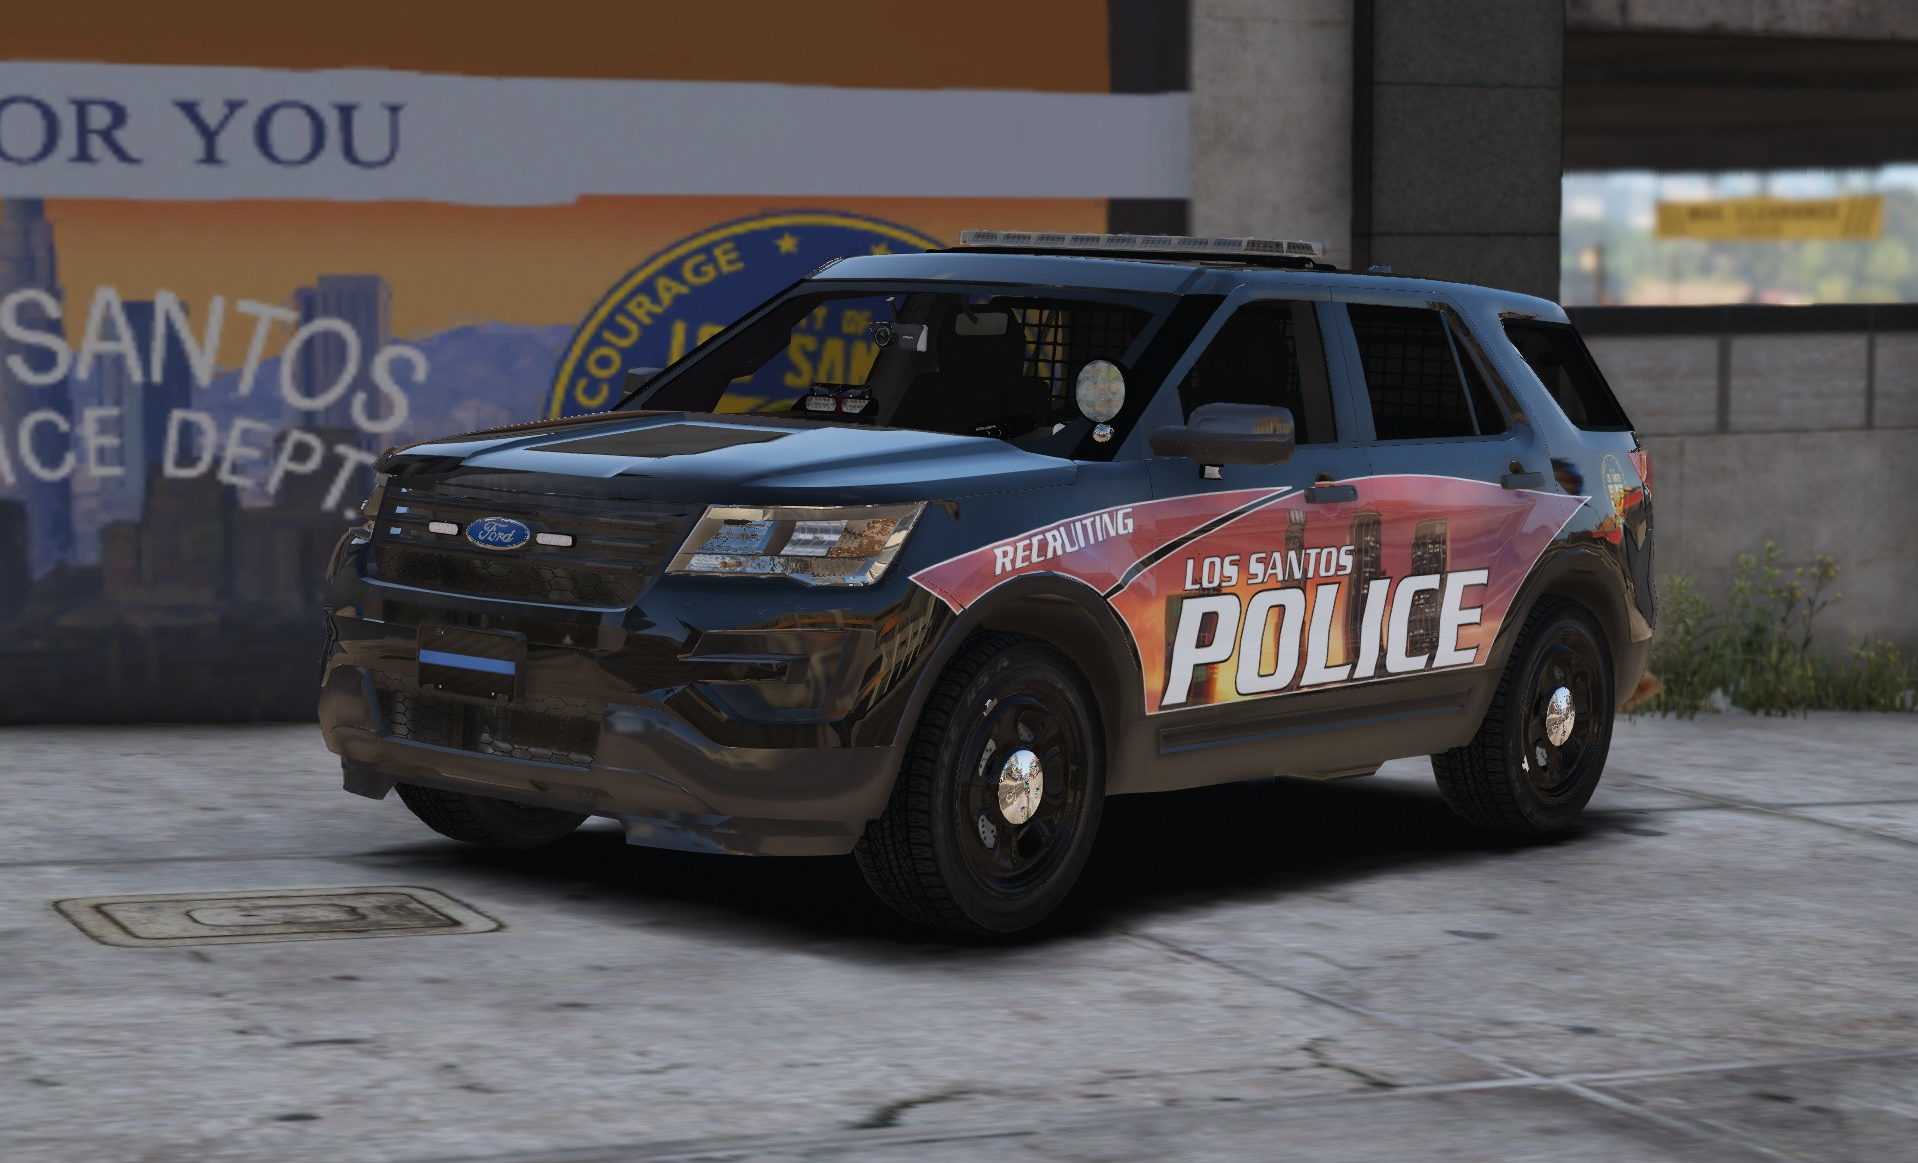 LSPD - BLAINE COUNTY PUBLIC SAFETY RP